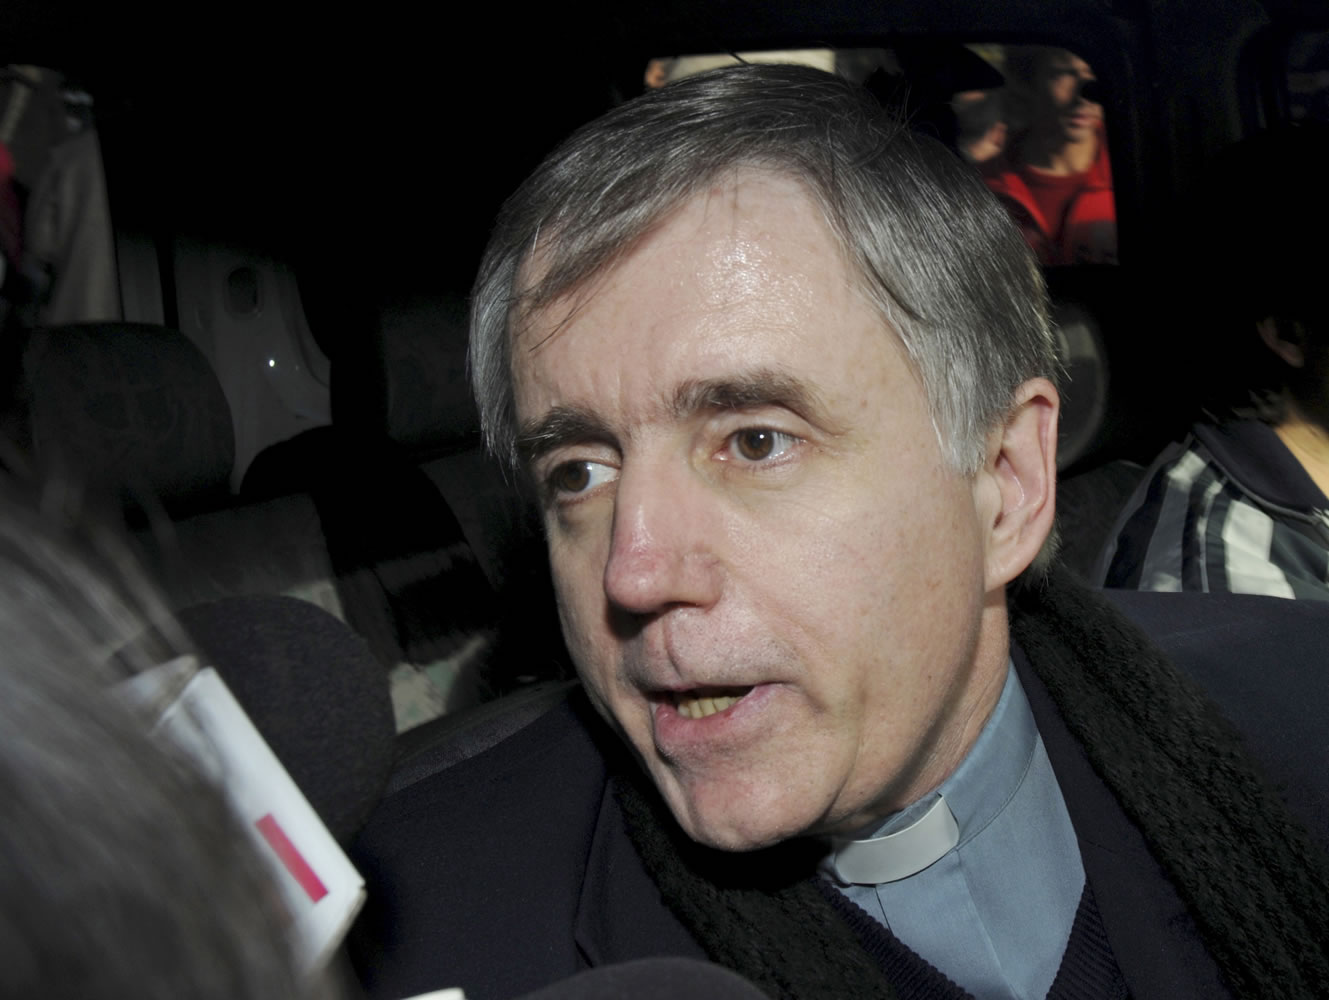 Argentine Catholic priest Julio Grassi talks to reporters as he leaves a courthouse after being found guilty of sexual abuse in Buenos Aires, Argentina, in 2009.